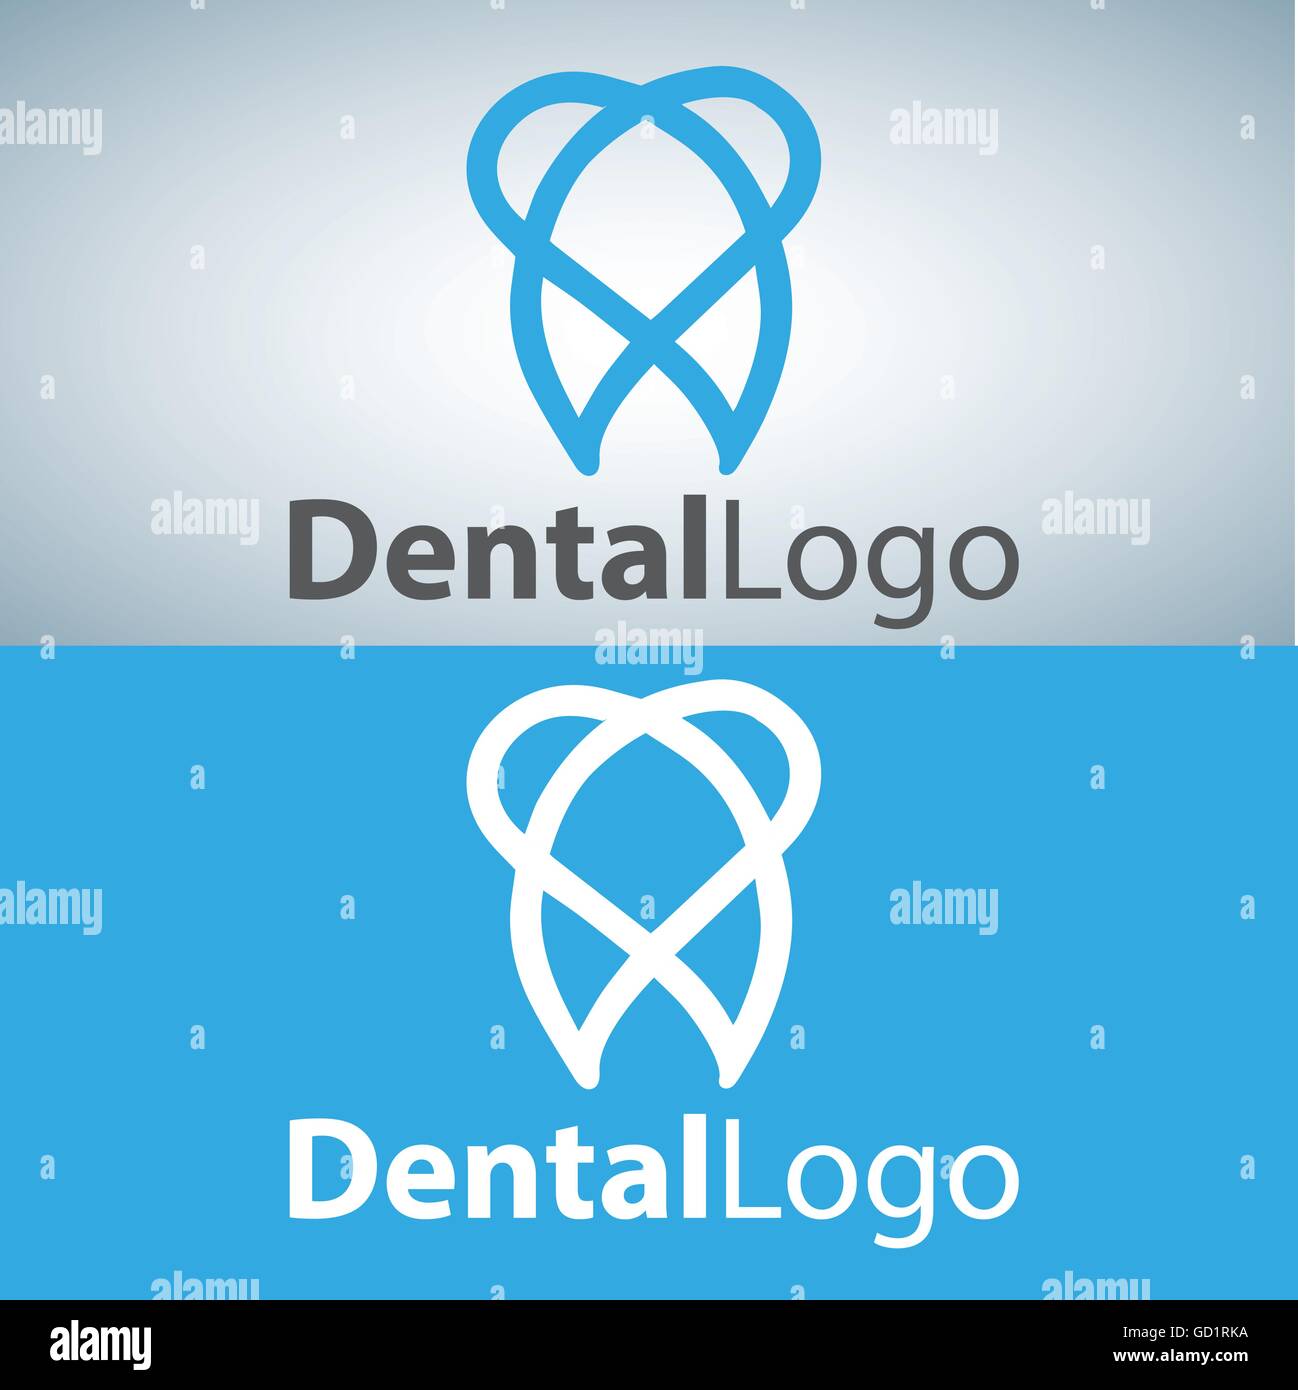 dental  logo designed in a simple way so it can be use for multiple proposes like logo ,mark ,symbol or icon. Stock Vector